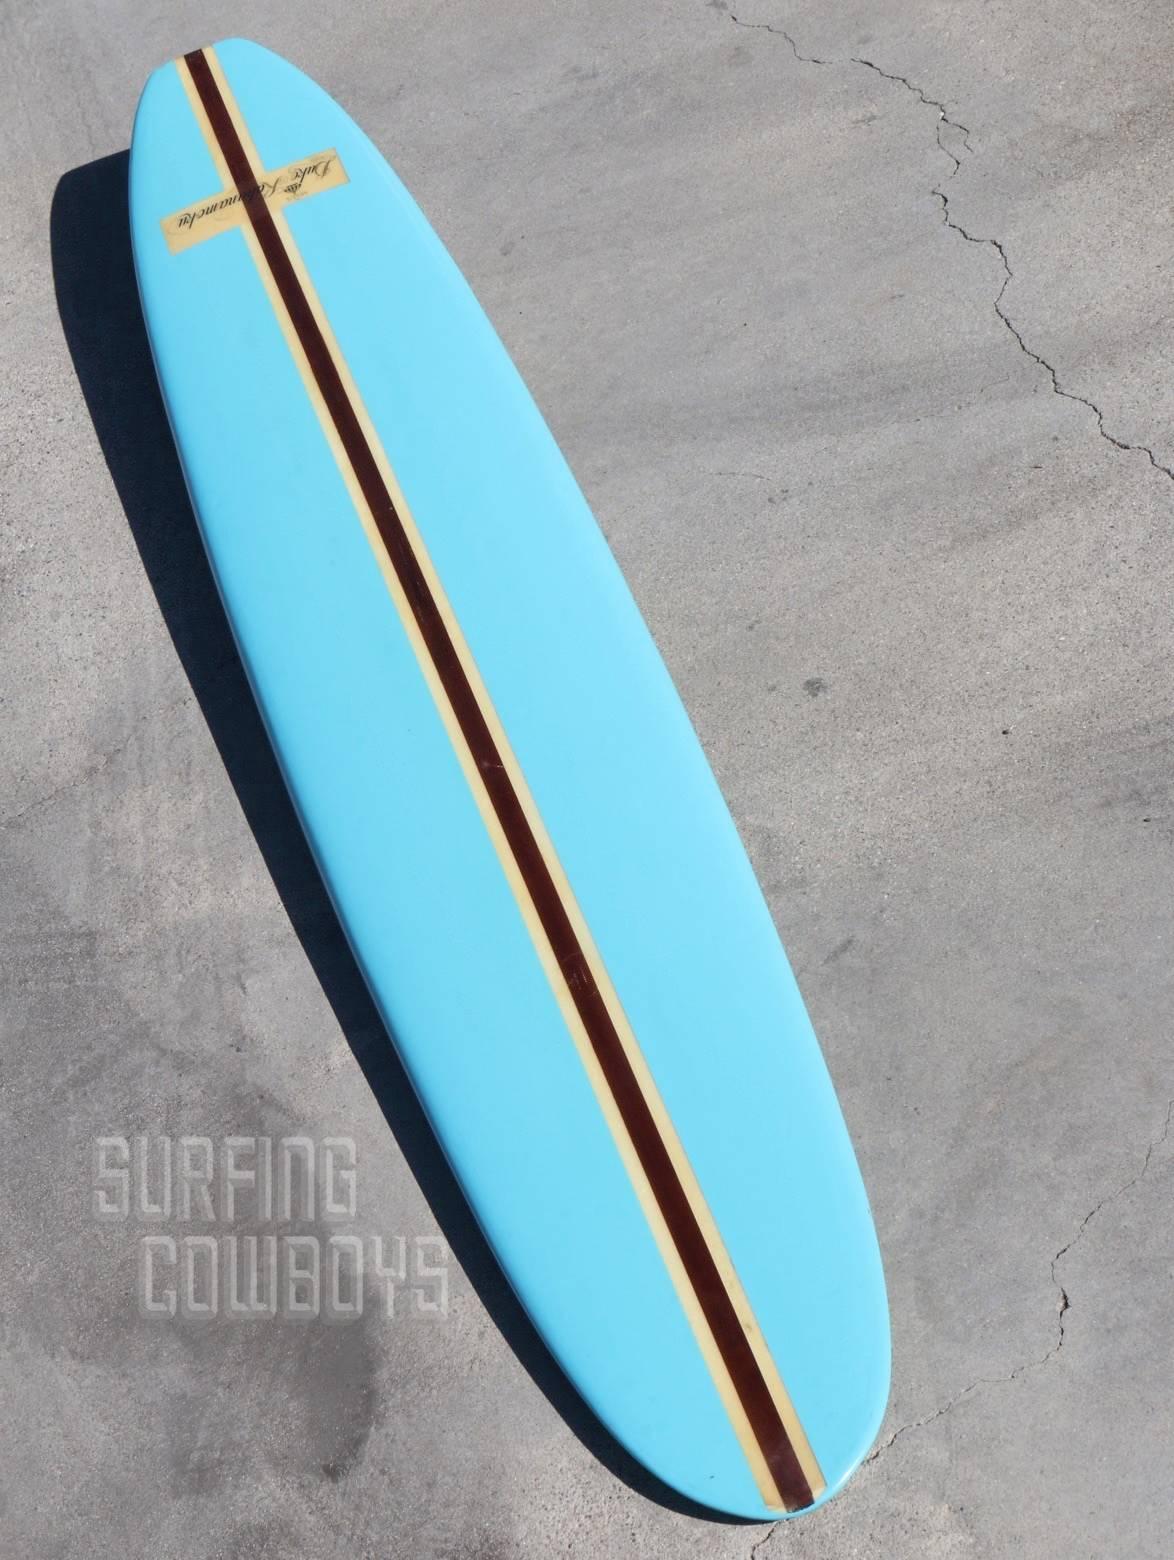 Bright, vibrant and glossy sky blue is accented by the wide redwood stringer which demonstrates that this Classic Hawaiian longboard was made to have the strength needed to ride the wildest of North Shore waves. This Classic surf collectible is